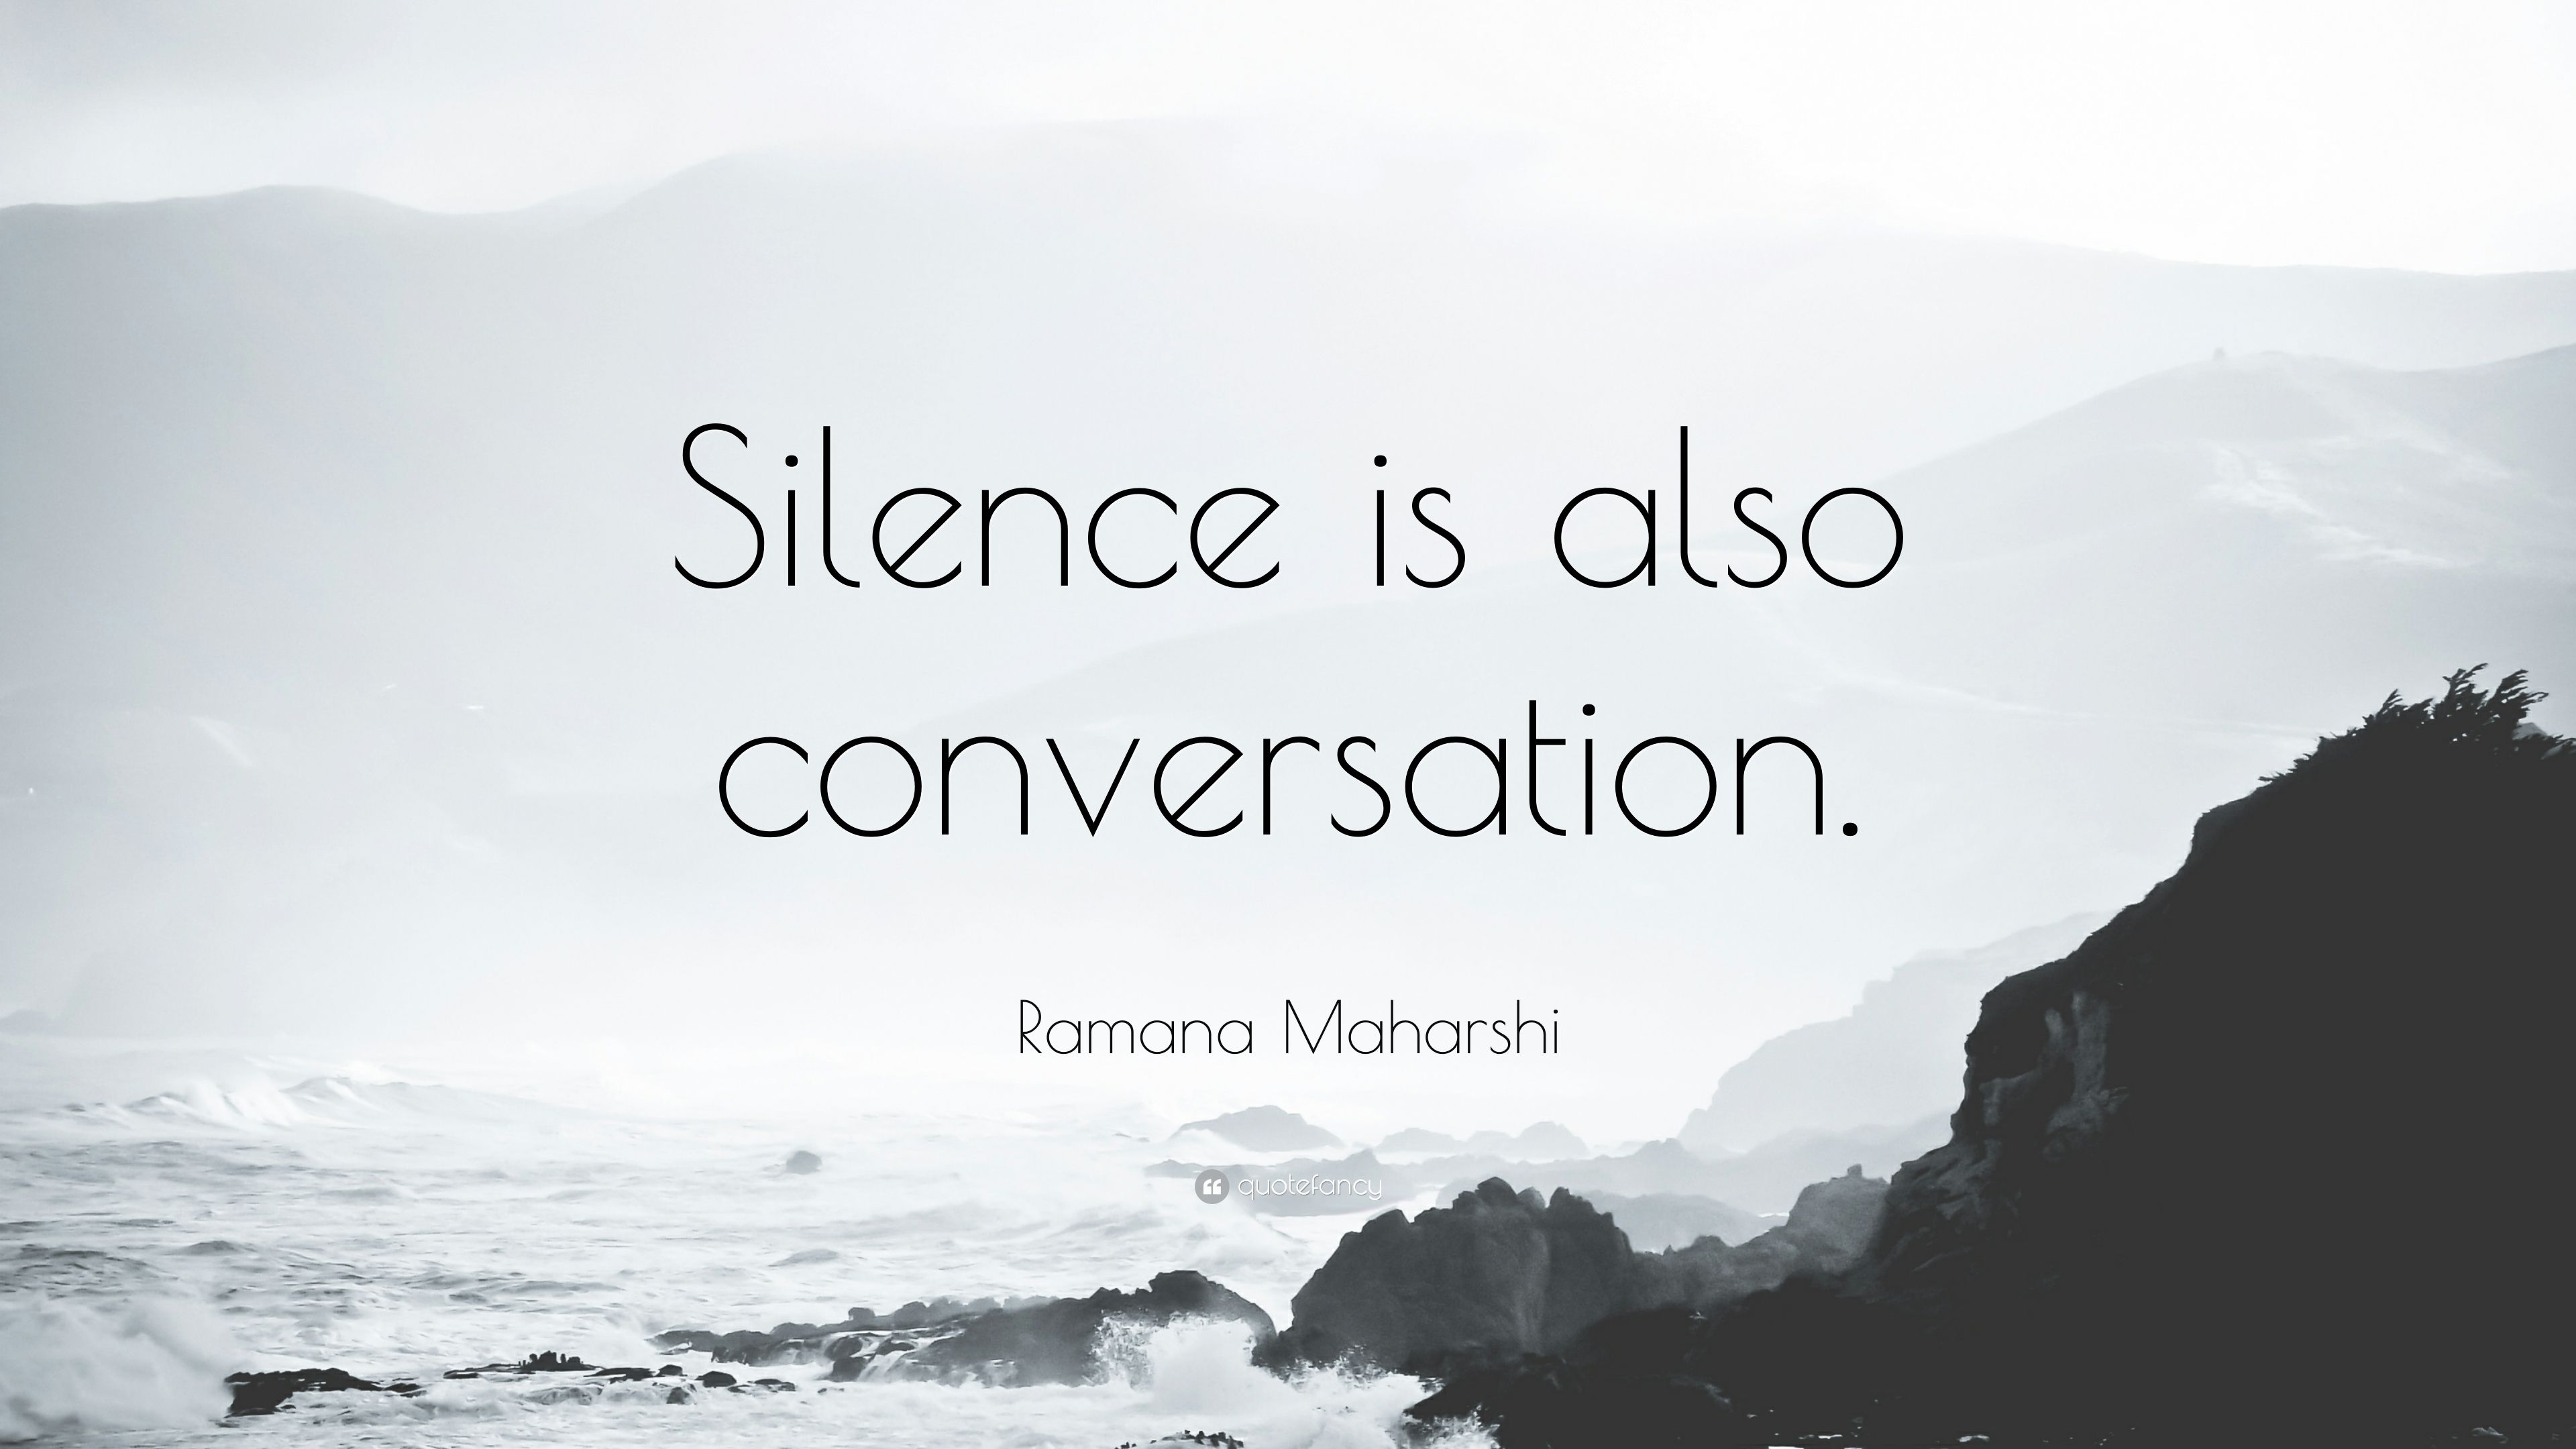 Ramana Maharshi Quote: “Silence is also conversation.” 7